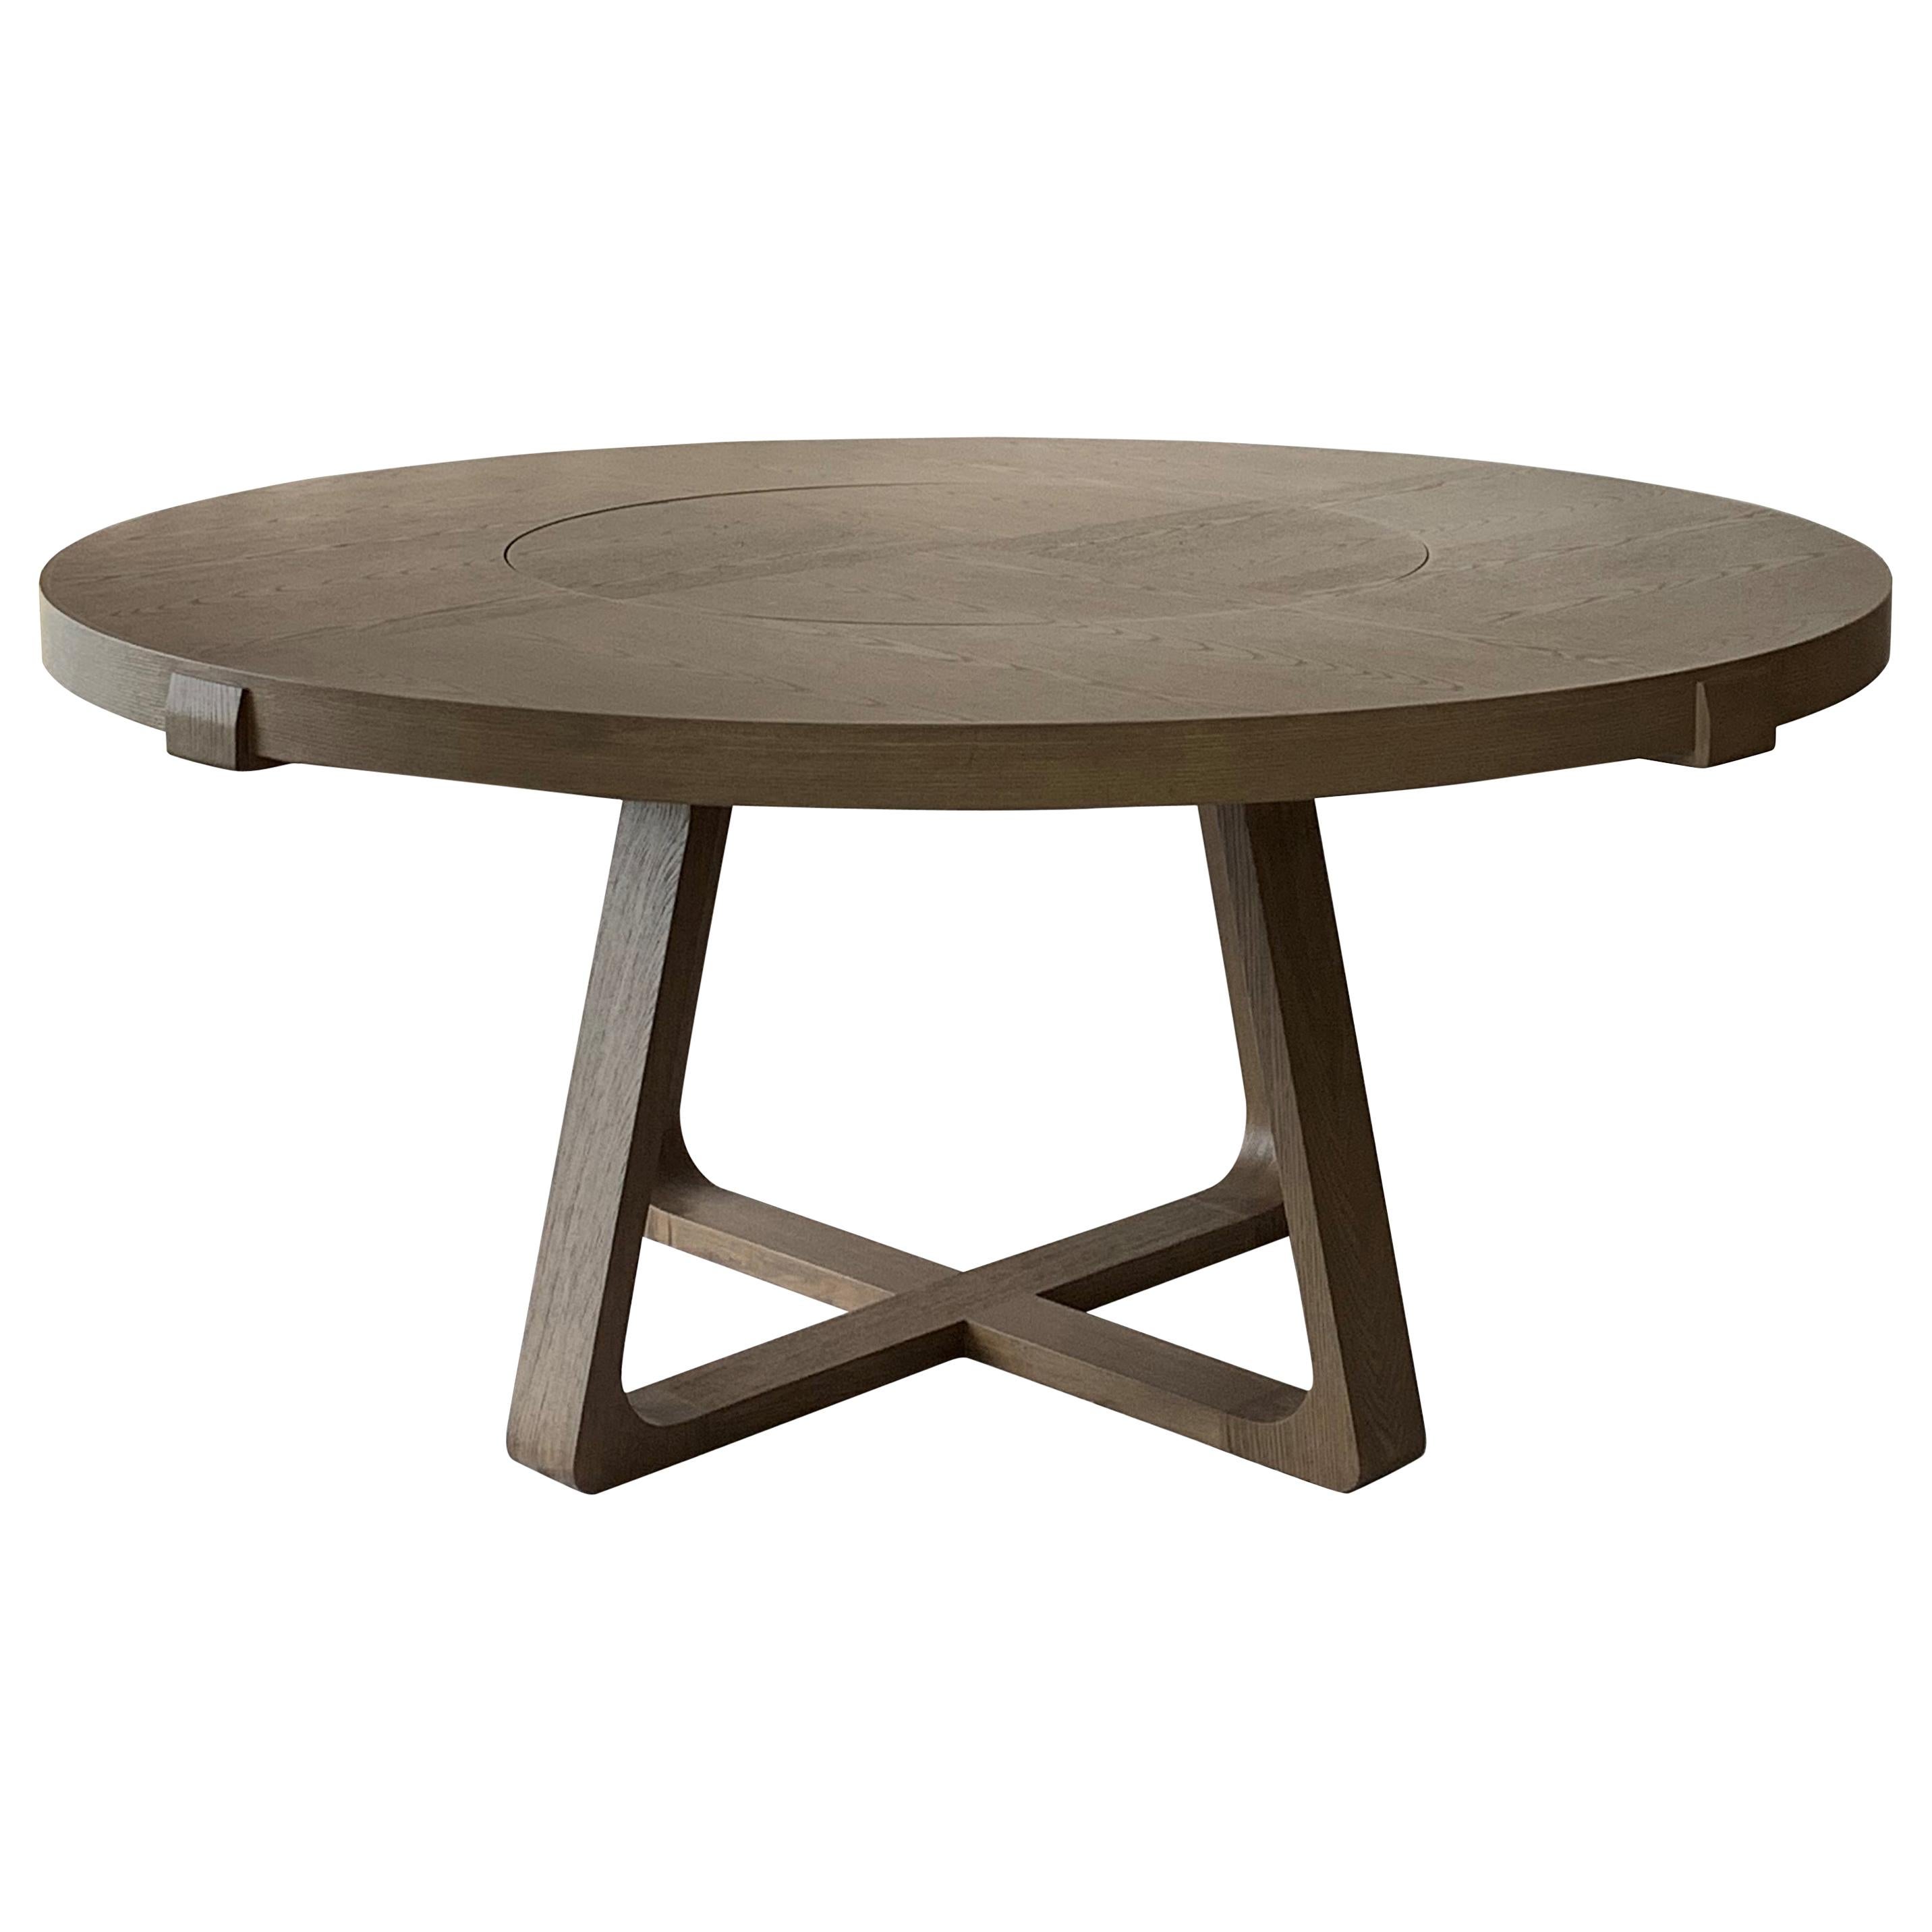 Round Dining Table With Lazy Susan 200cm Interlock André Fu Living Grey Oak New